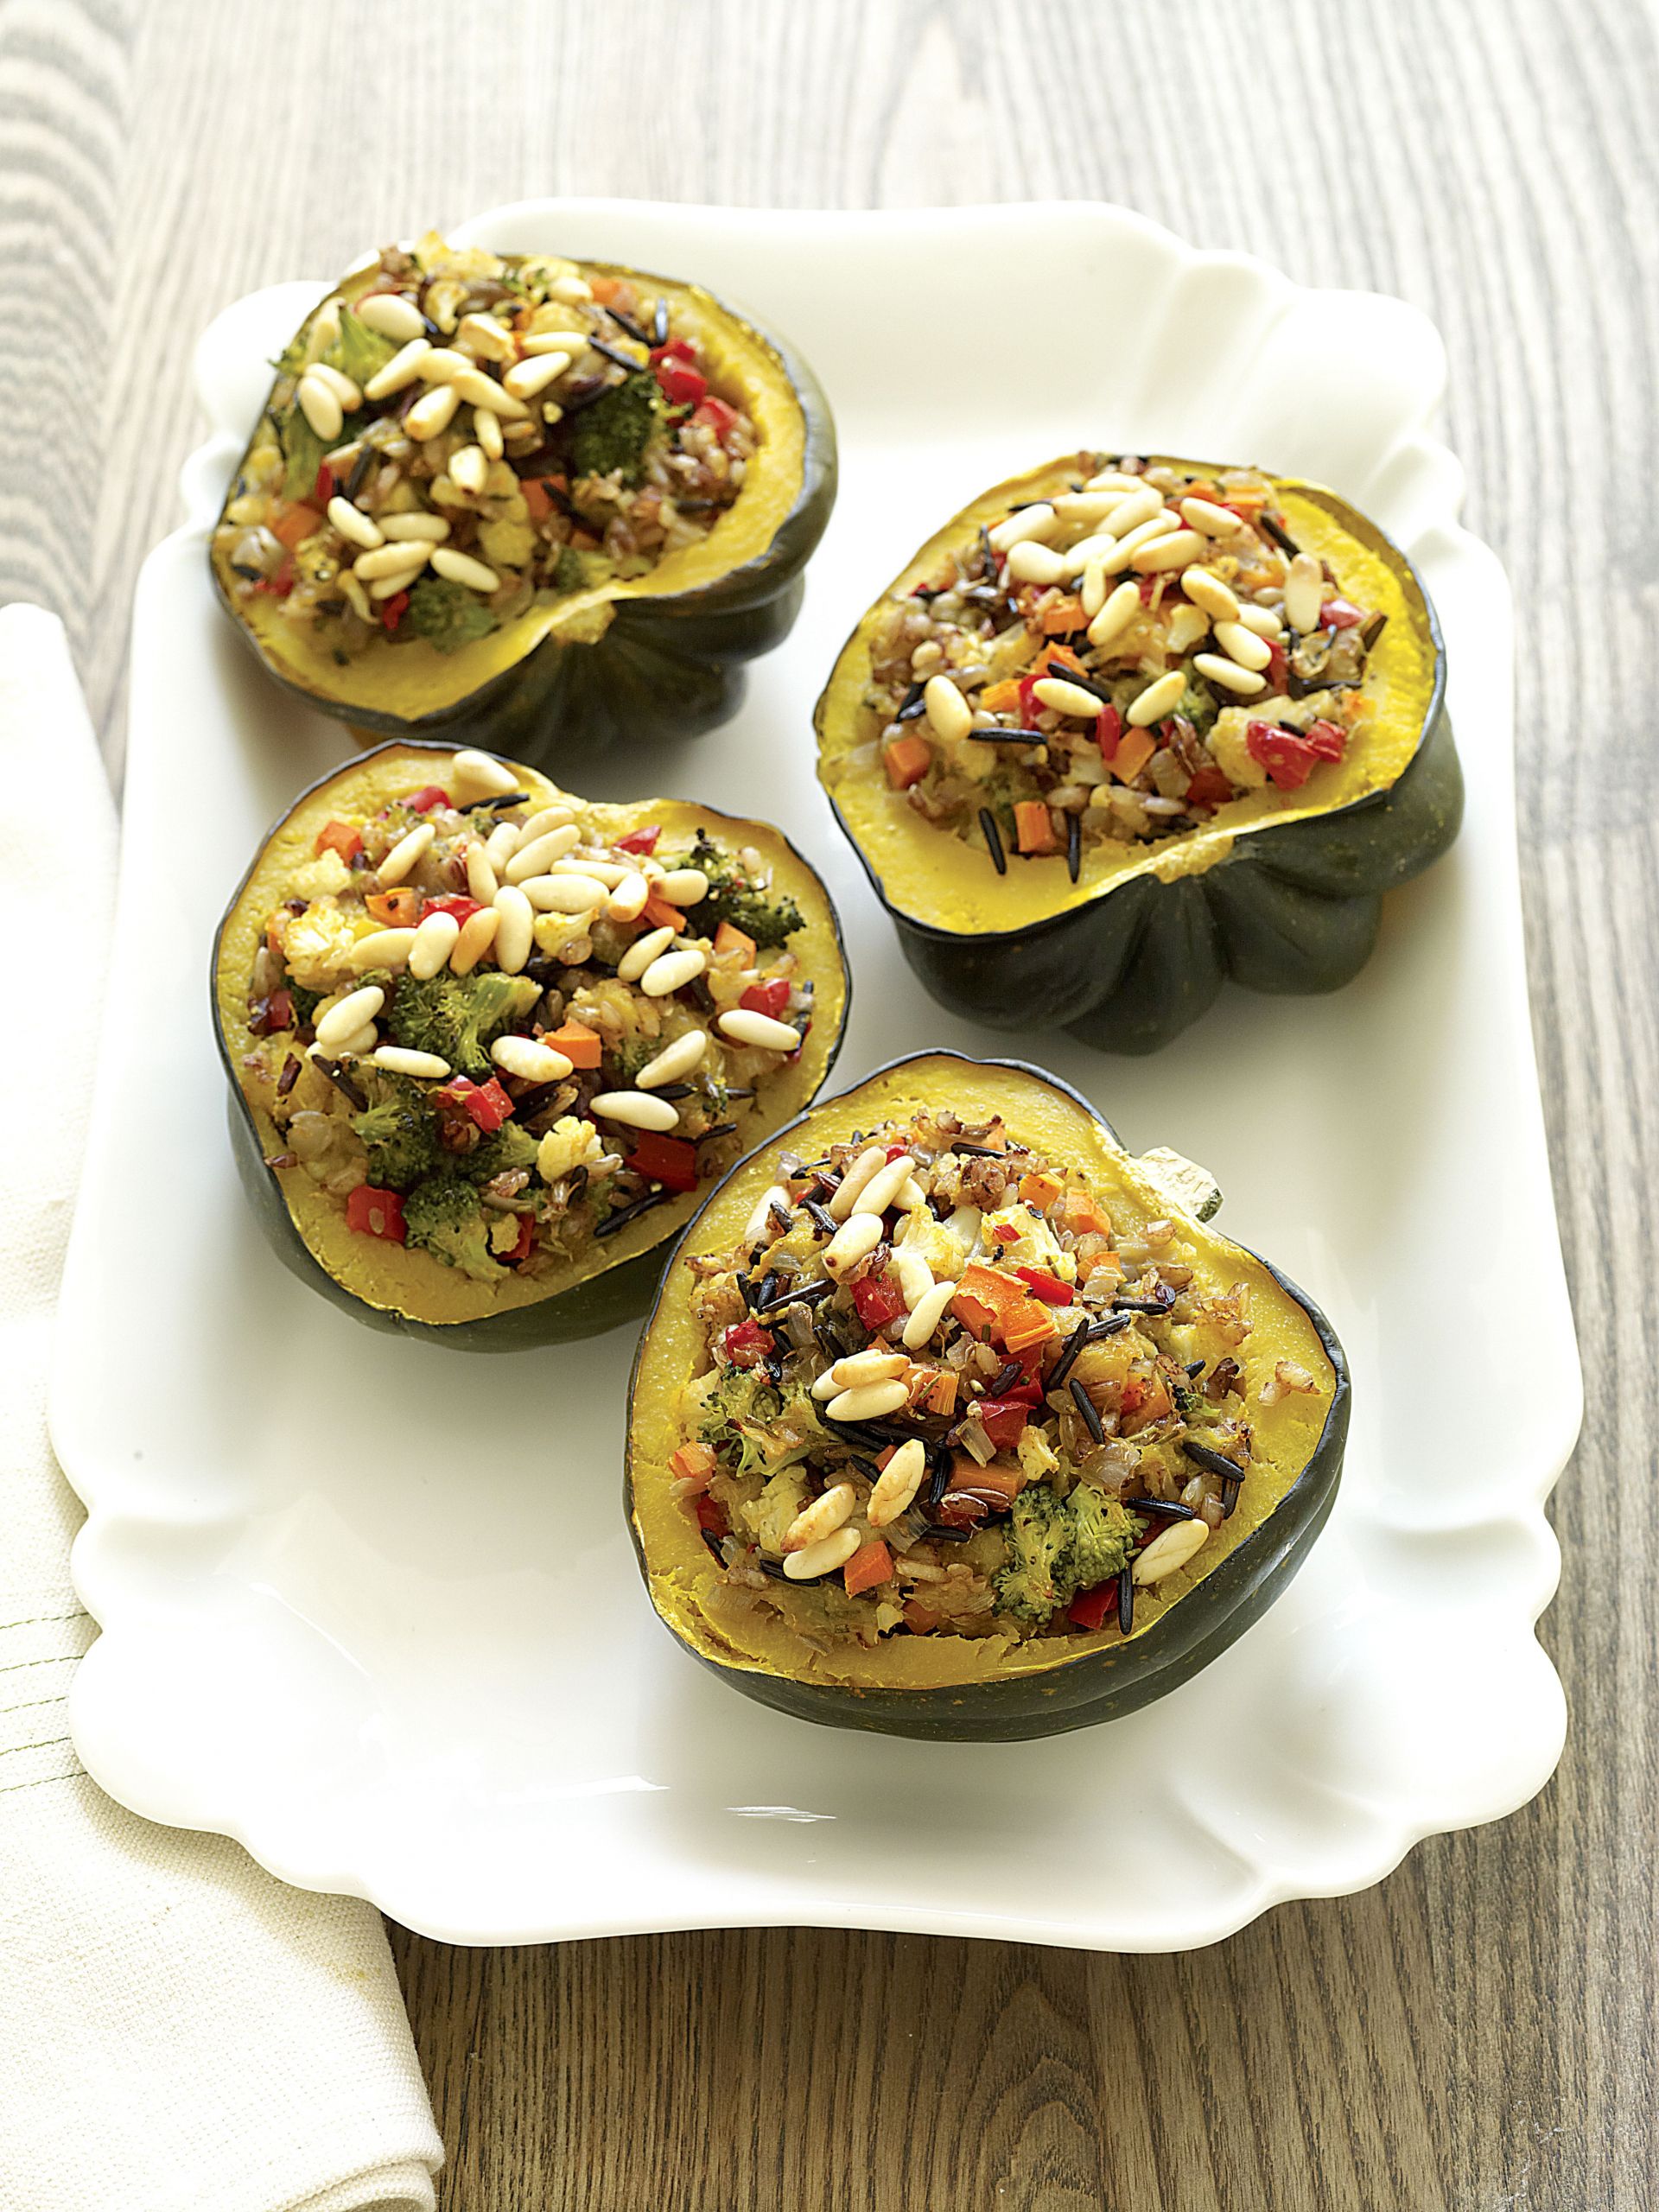 Wfpb Recipes Forks Over Knives Plant Based Diet
 Roasted Stuffed Winter Squash from the Forks Over Knives